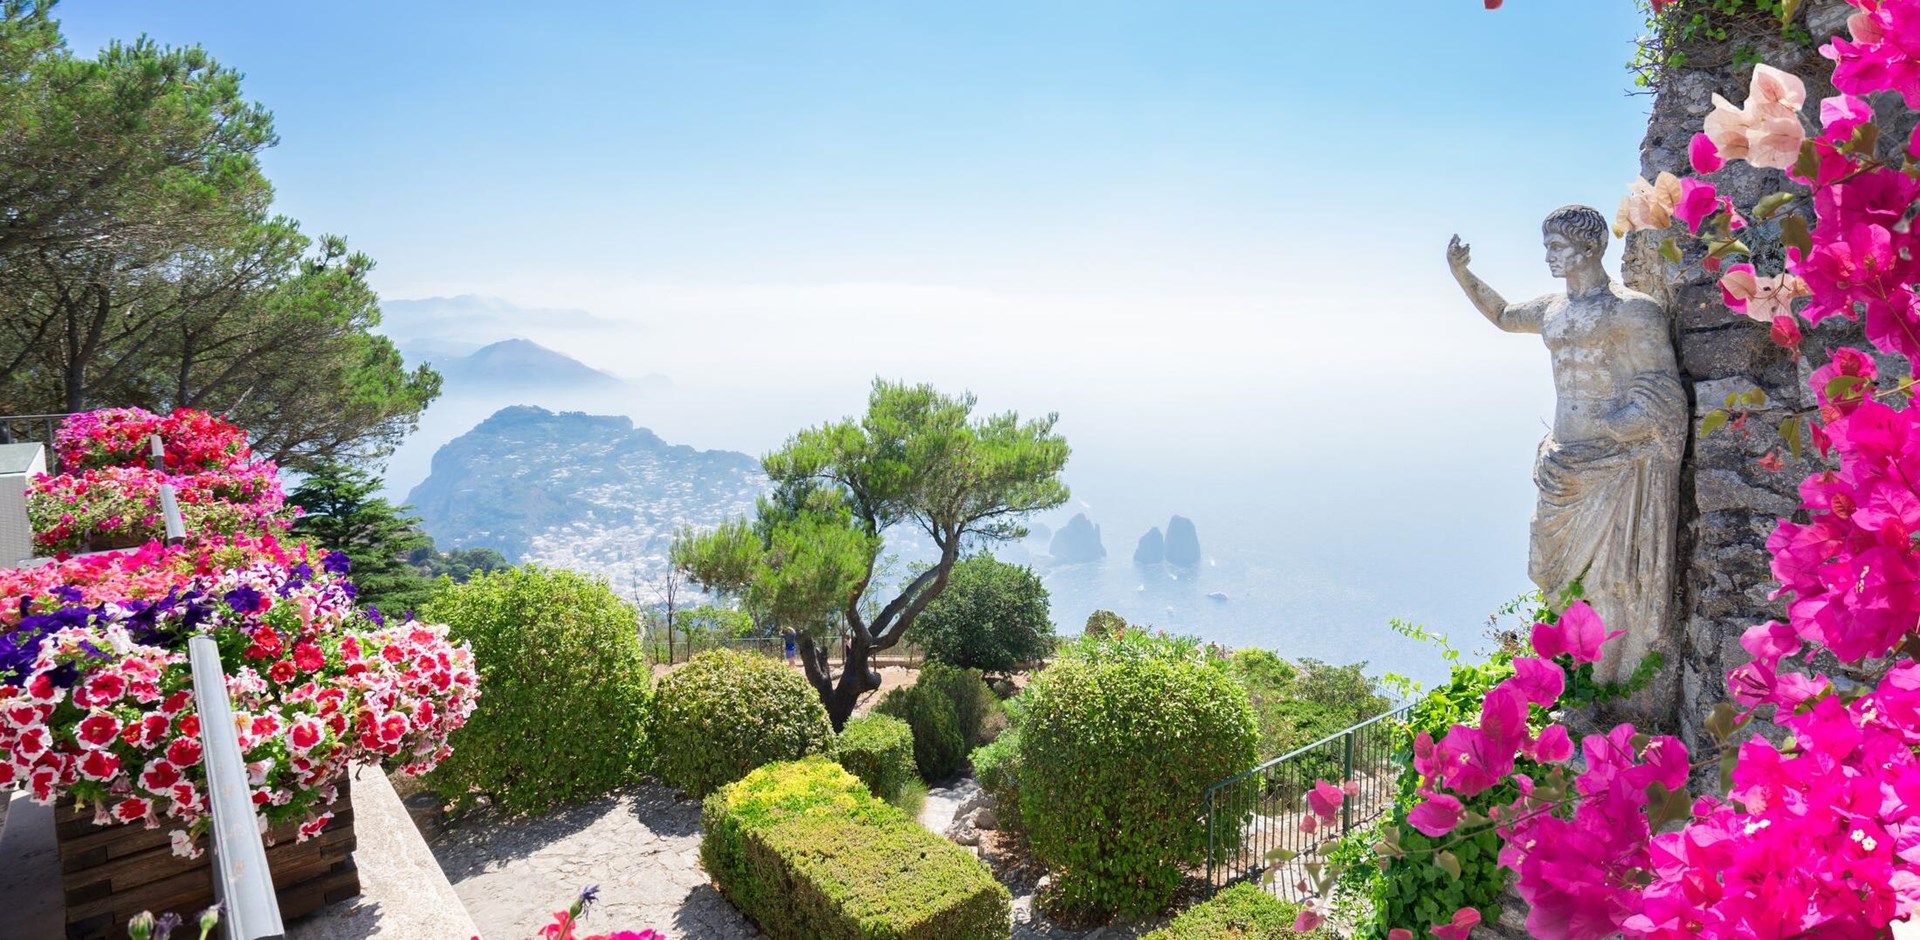 View from mount Solaro of Capri island at summer day, Italy